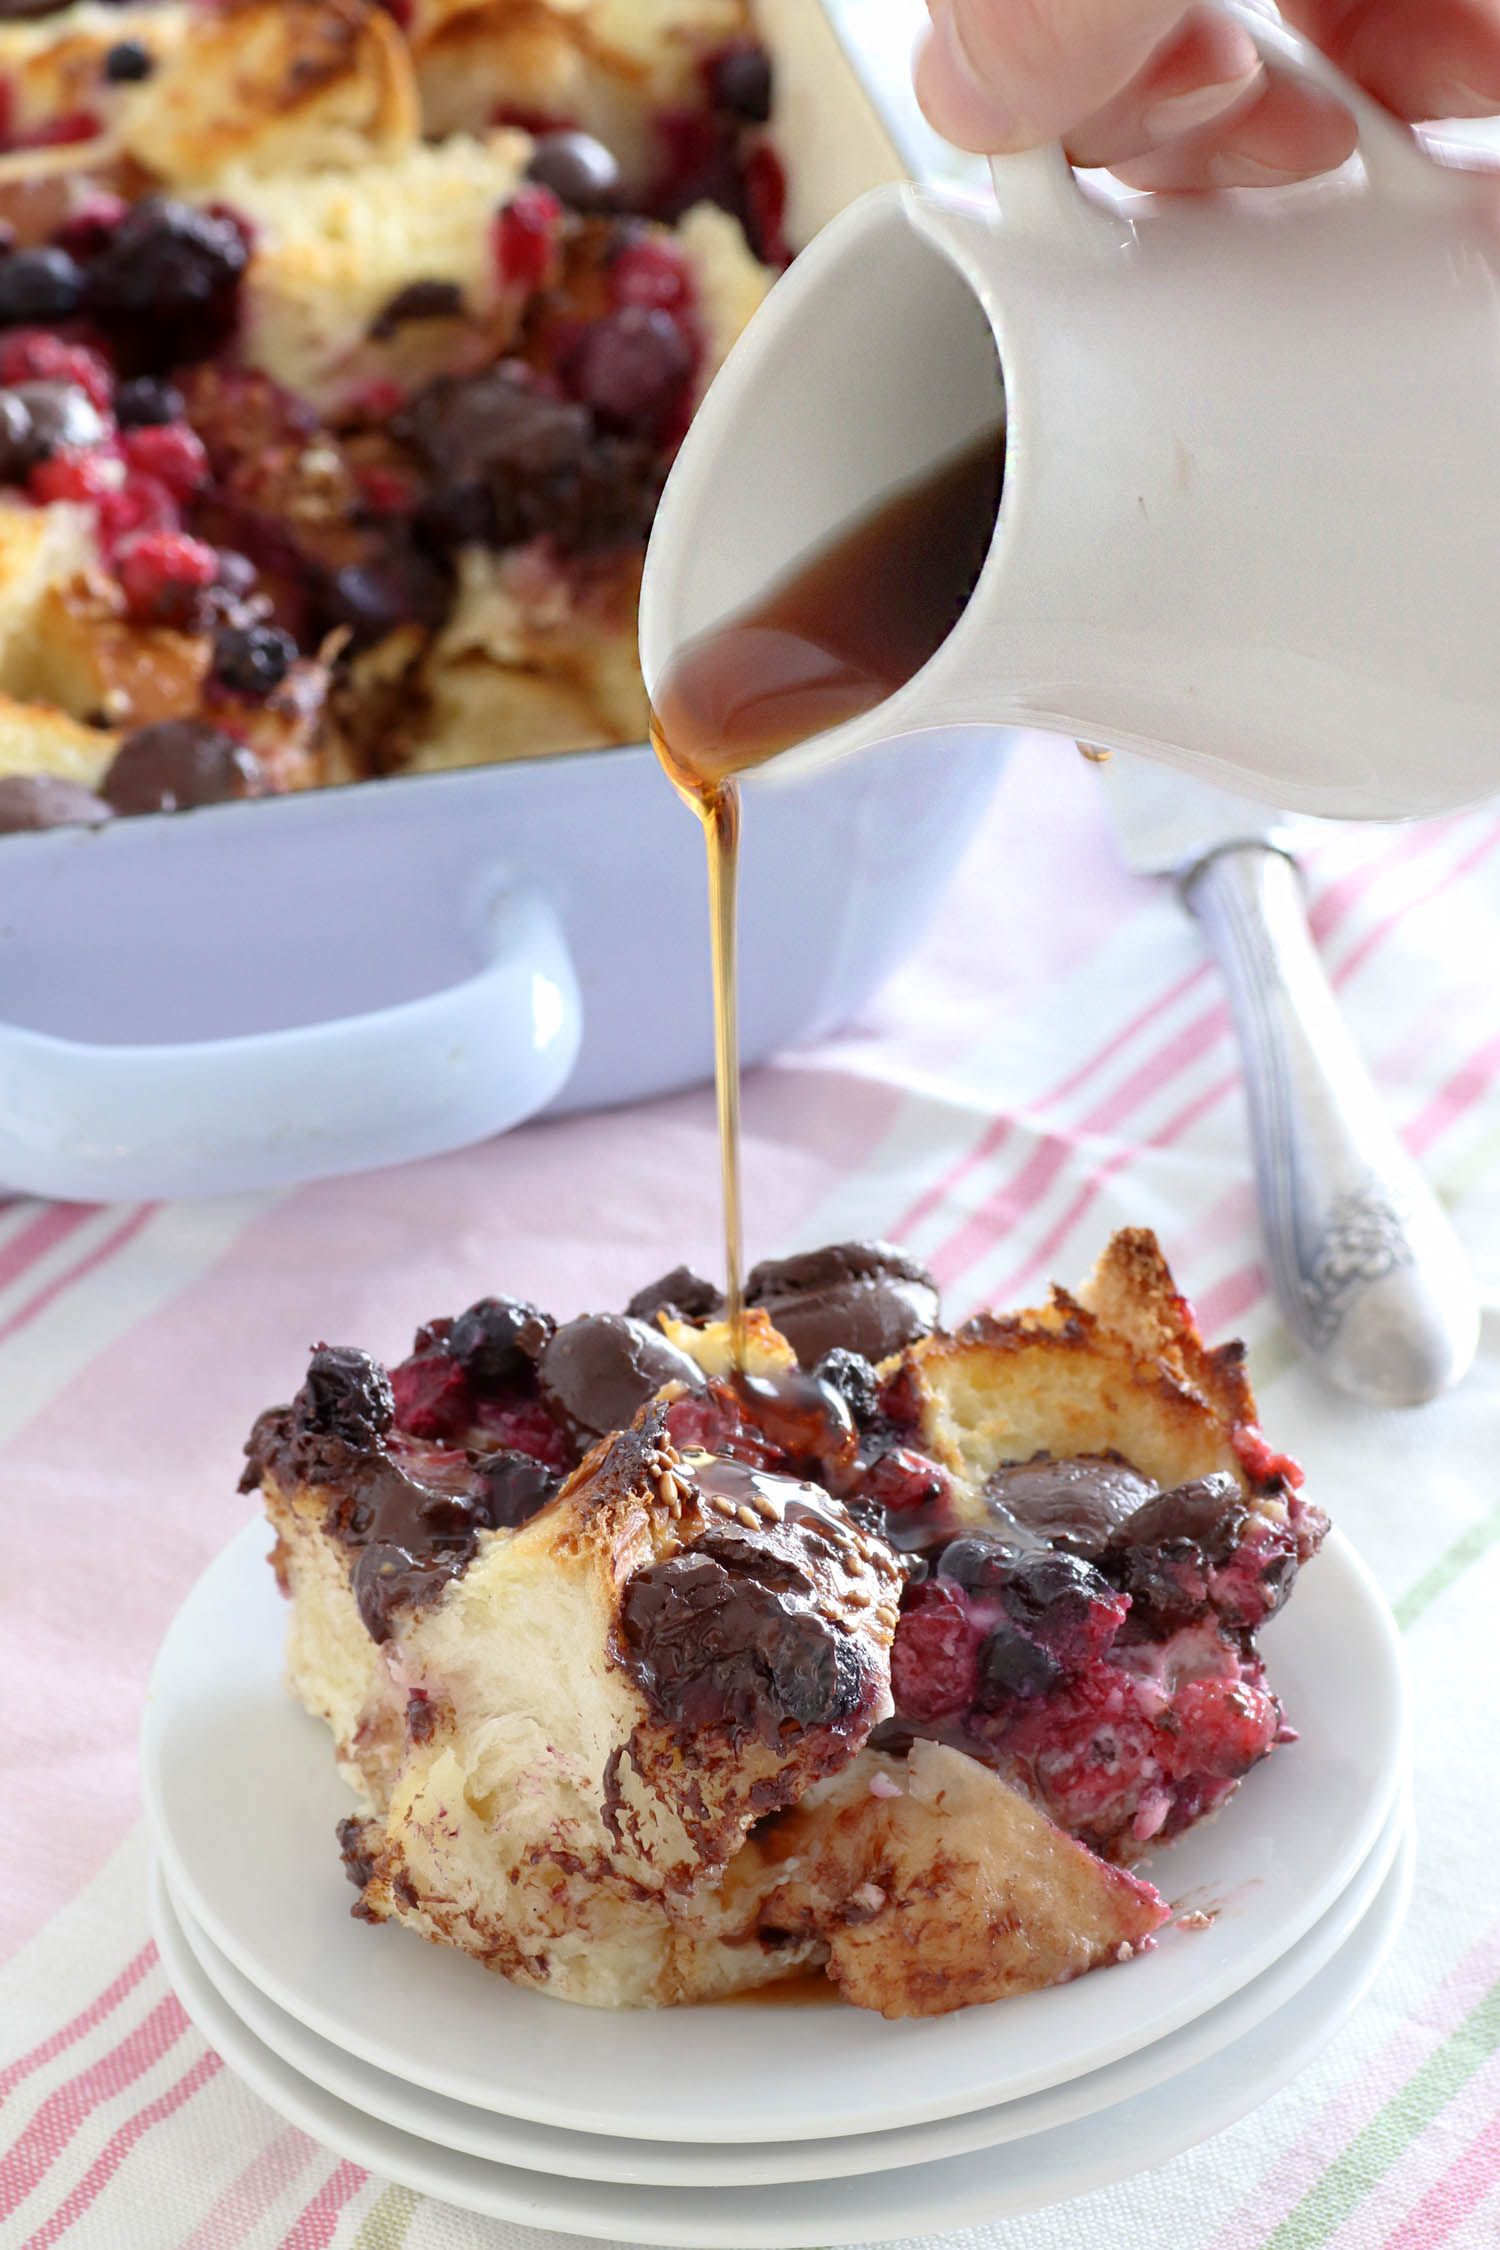 Chocolate Bread Pudding with Berries